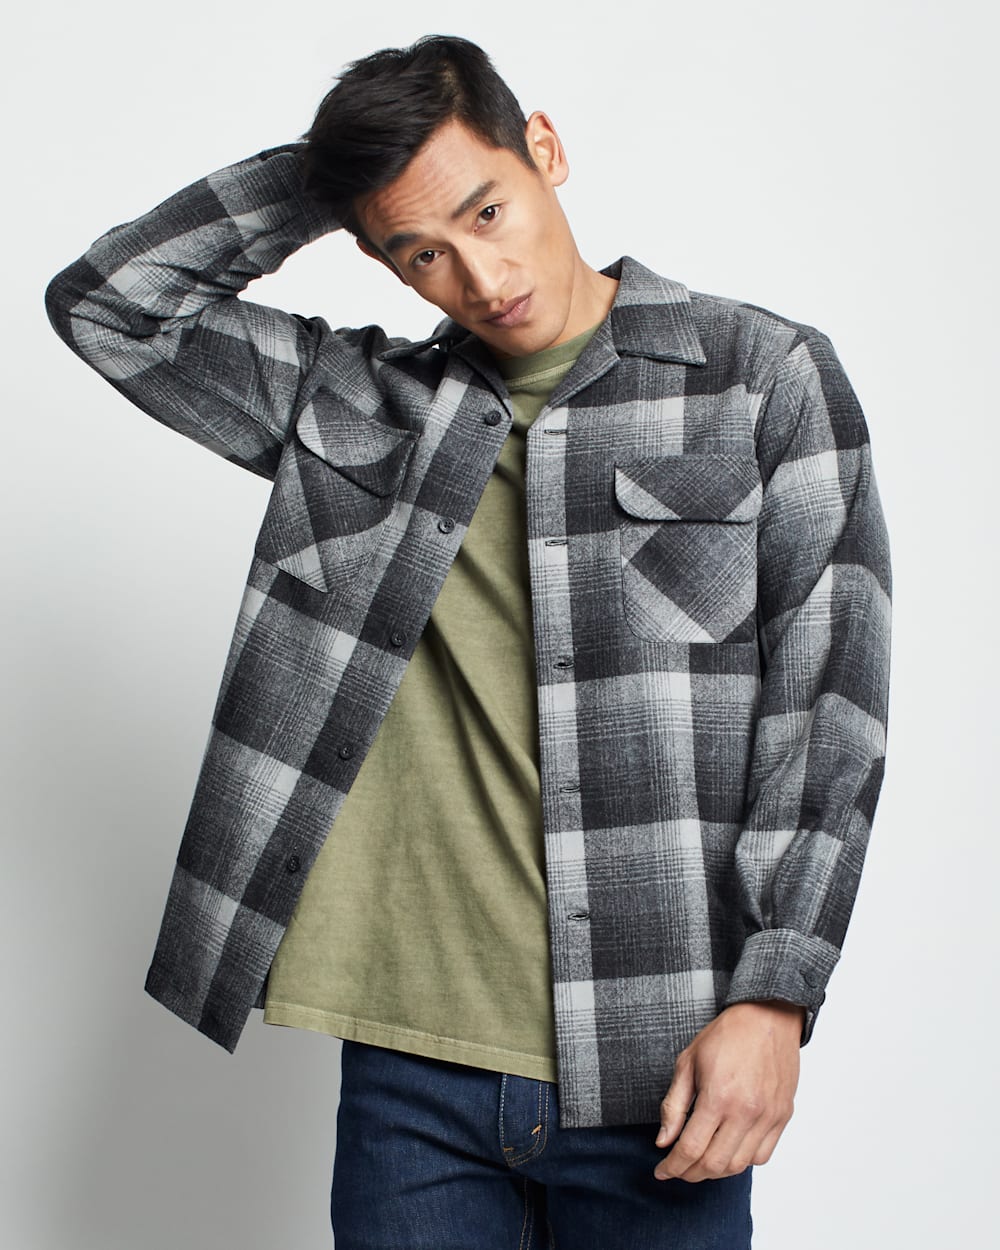 ALTERNATE VIEW OF MEN'S PLAID BOARD SHIRT IN GREY/OXFORD OMBRE image number 5